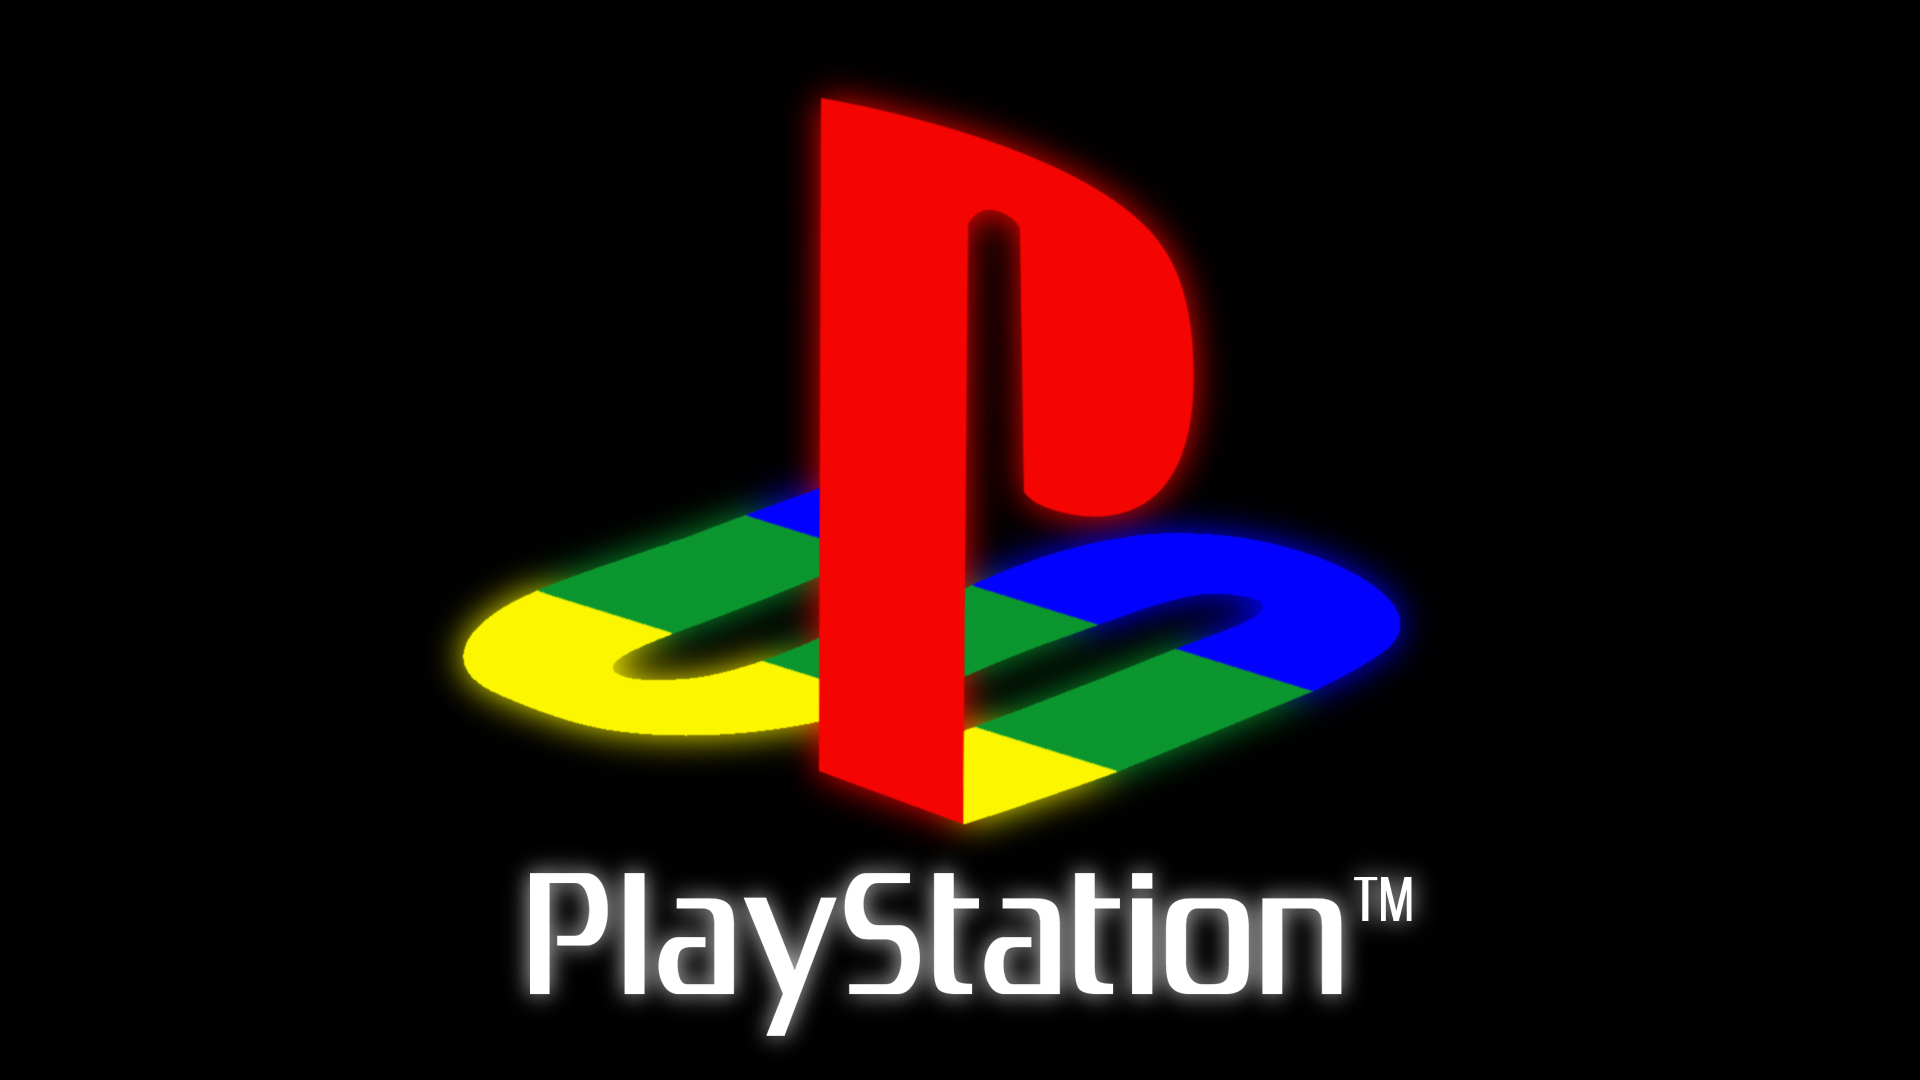 sony playstation logo by chibiprof customization wallpaper other 2010 1920x1080